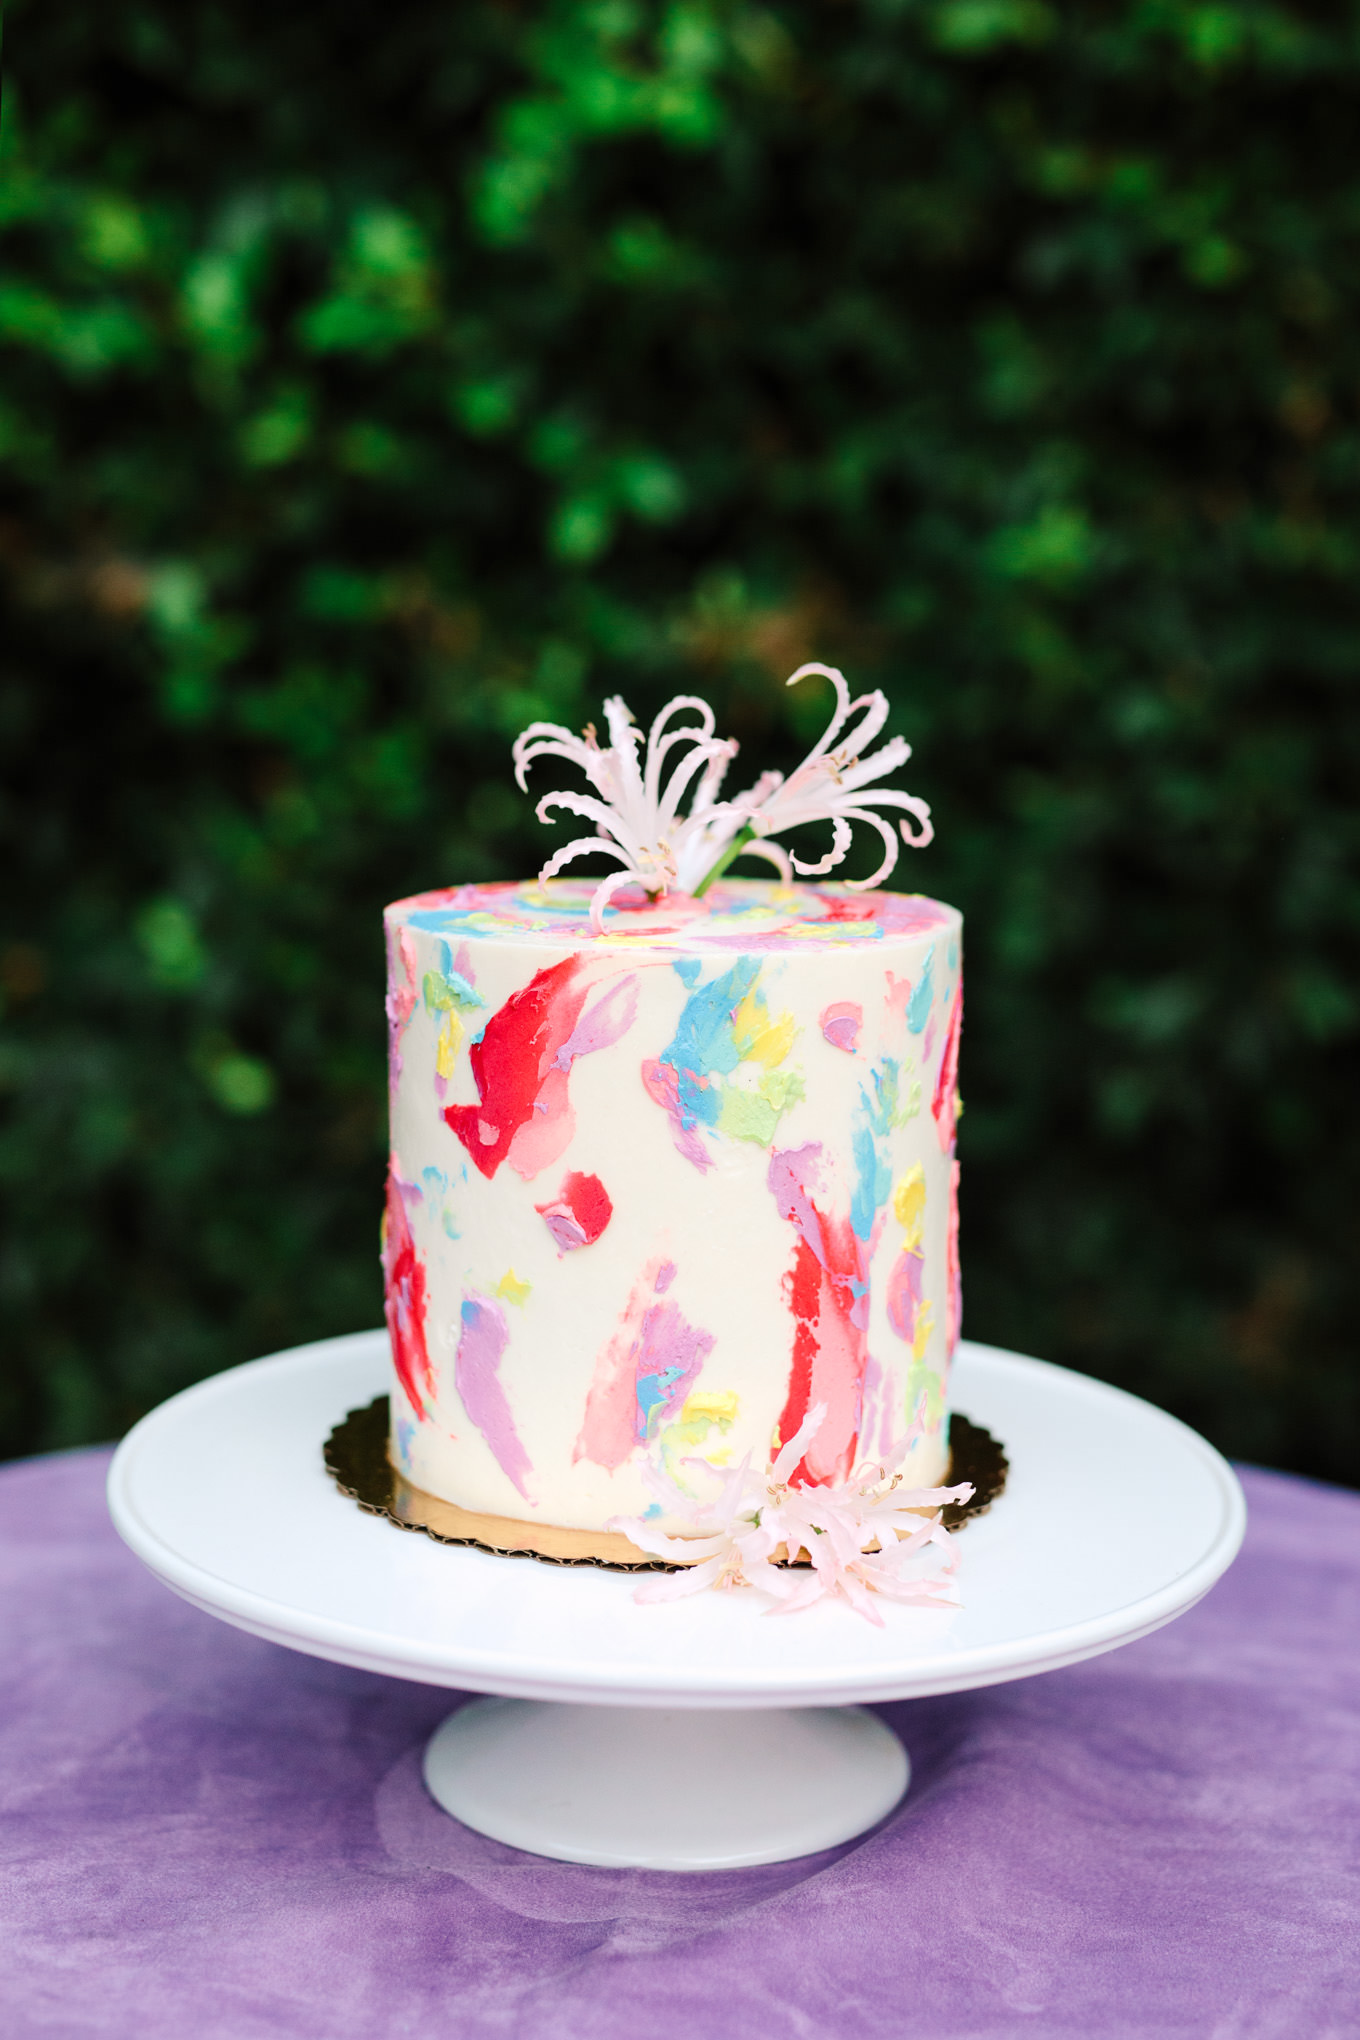 Colorful watercolor taro cake by Flouring LA | Colorful pop-up micro wedding at The Ruby Street Los Angeles featured on Green Wedding Shoes | Colorful and elevated photography for fun-loving couples in Southern California | #colorfulwedding #popupwedding #weddingphotography #microwedding Source: Mary Costa Photography | Los Angeles